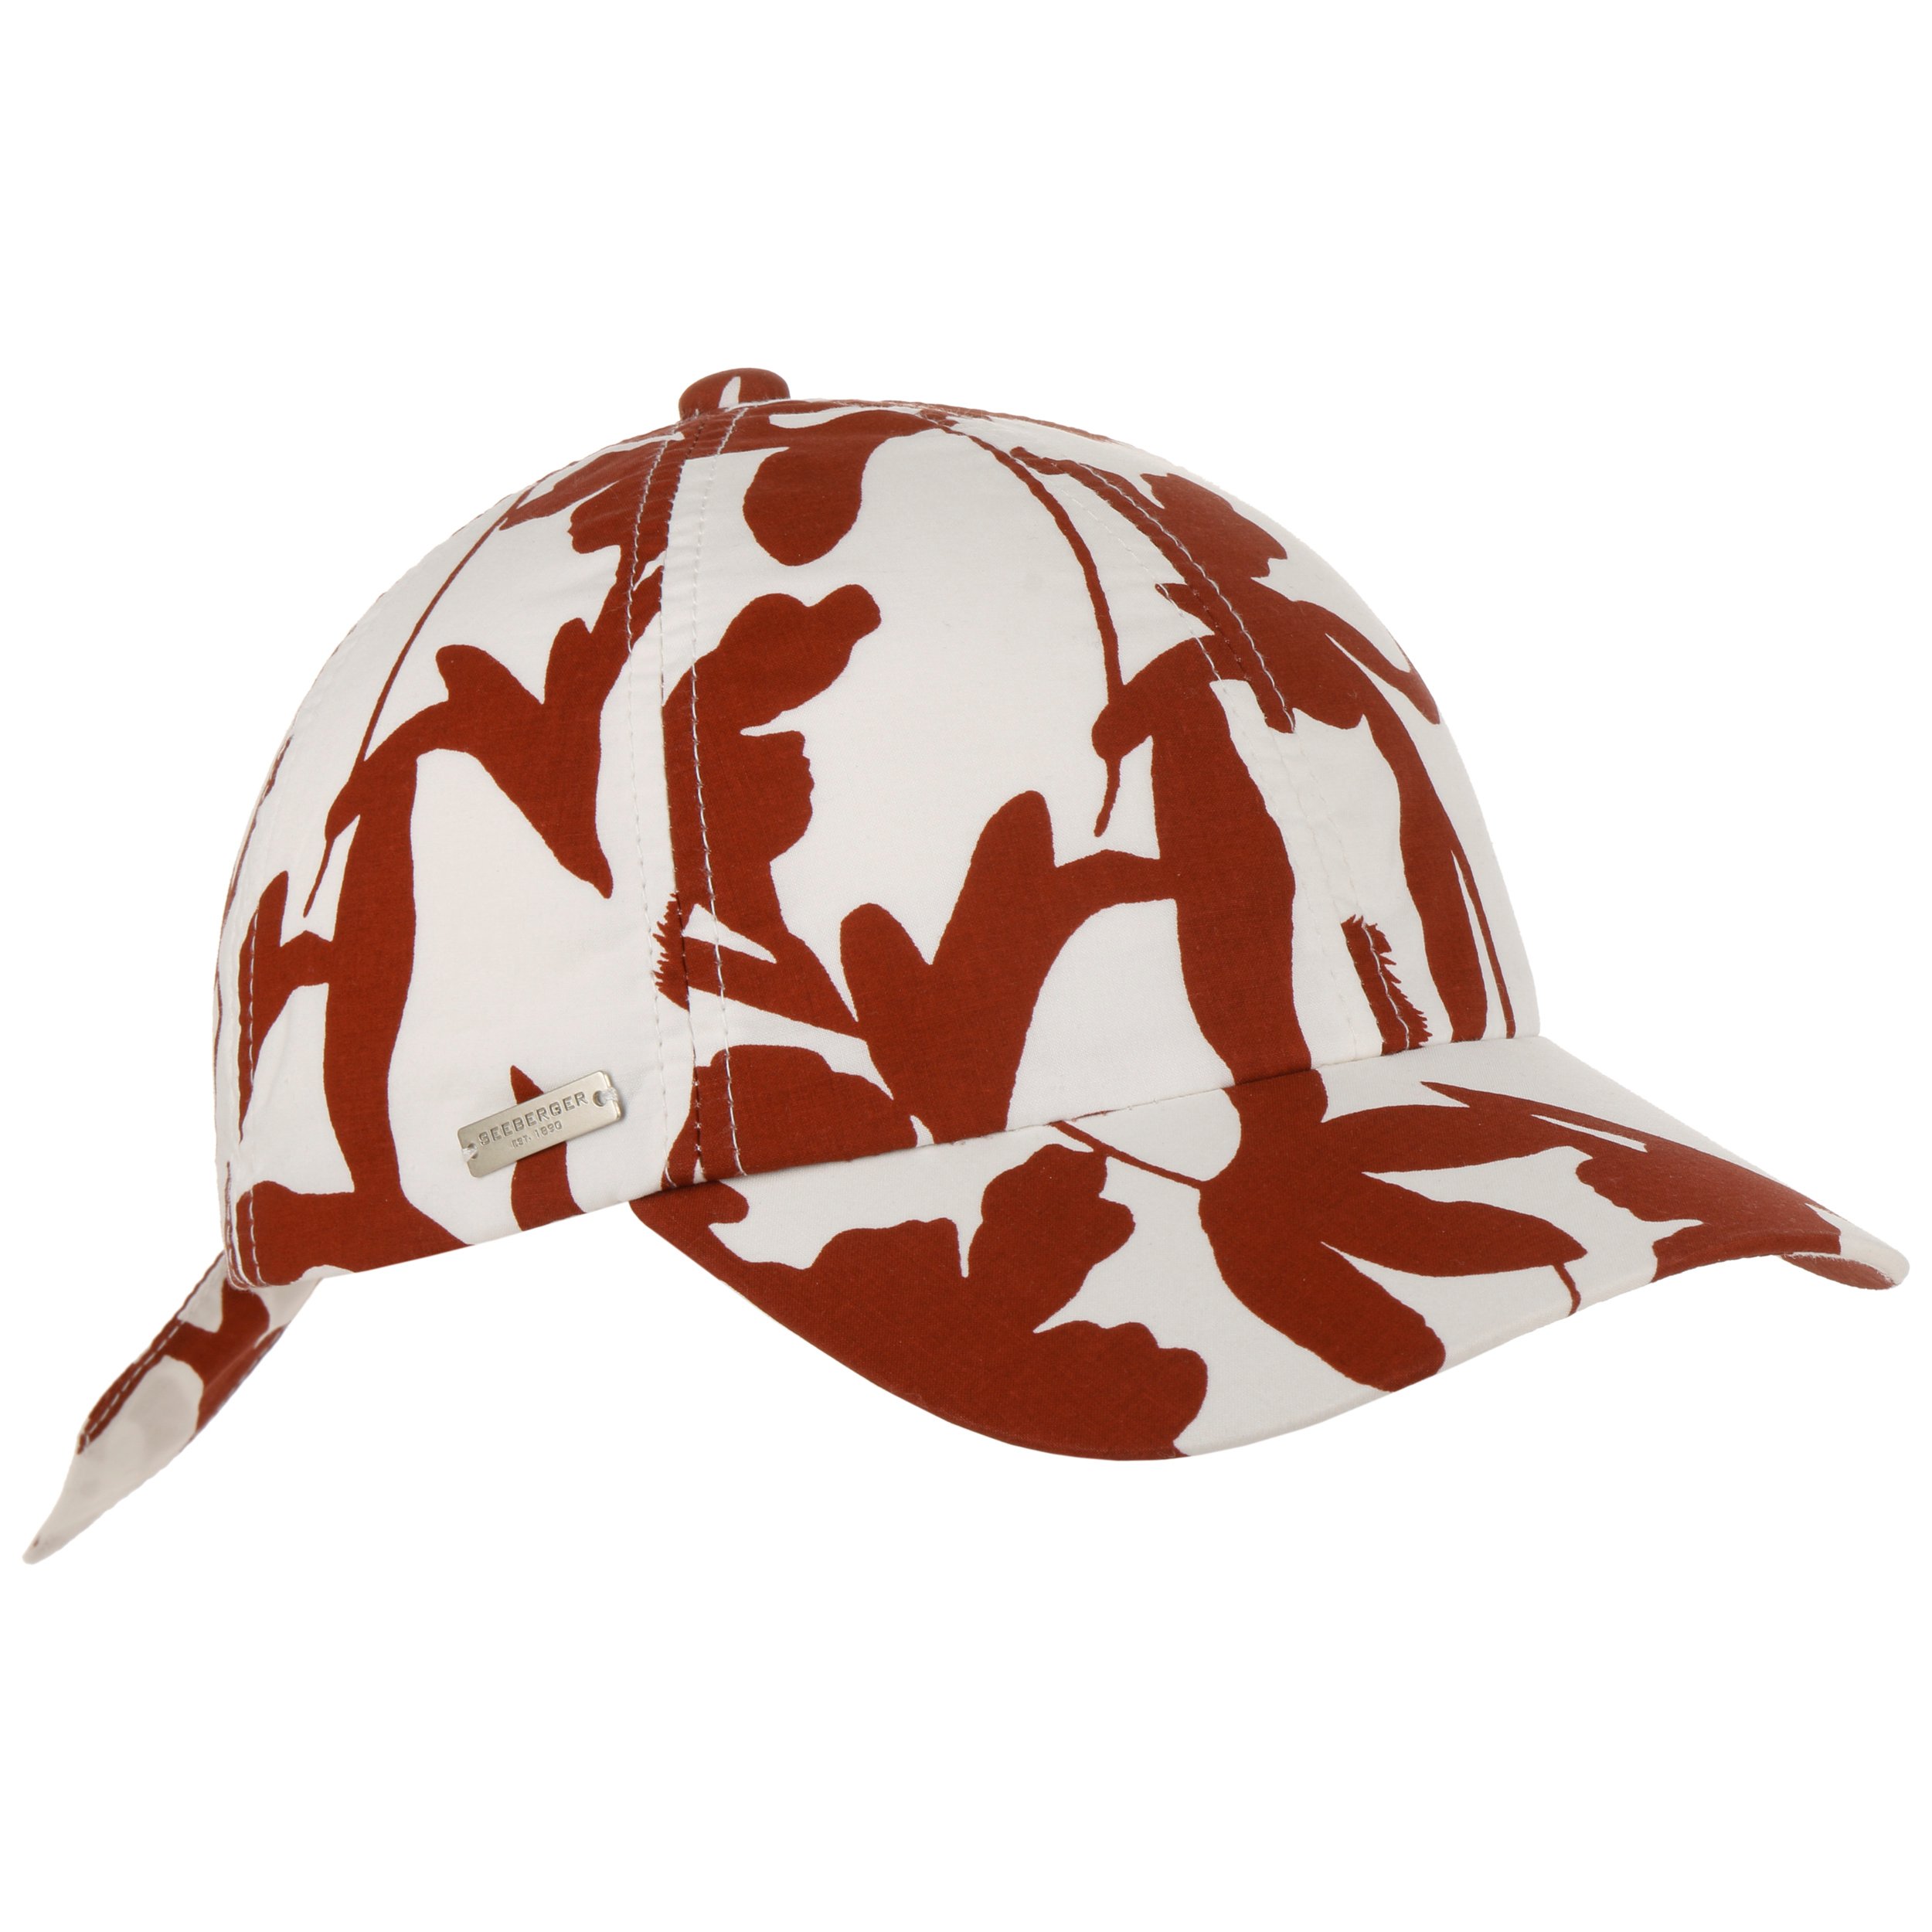 Cap by € Twotone - Seeberger Flower 29,95